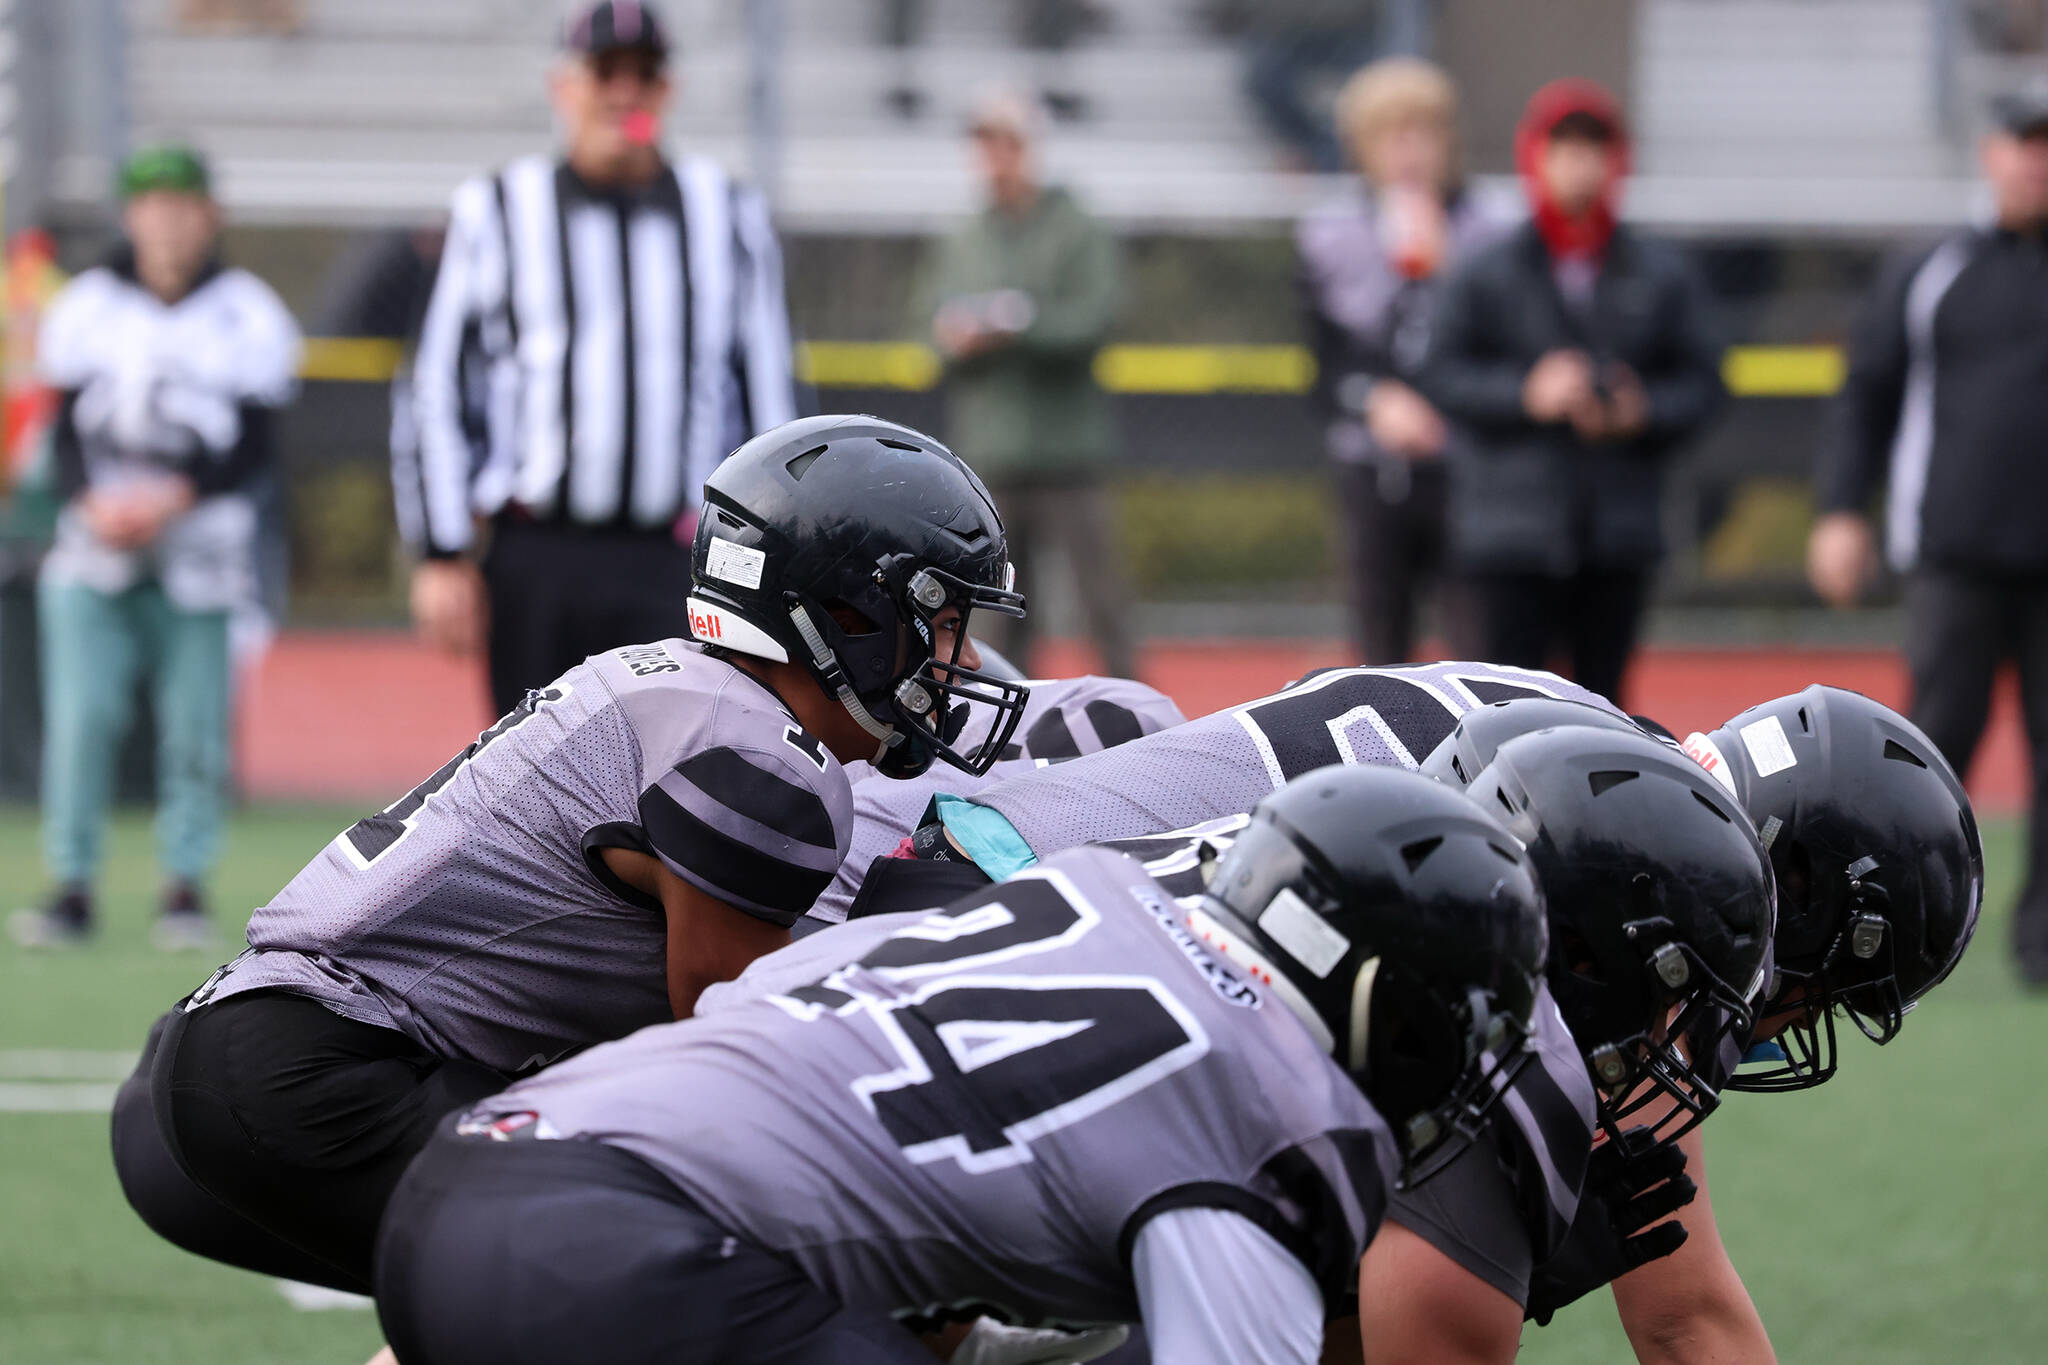 The Juneau Huskies offense prepares to kneel to end the half against the Bettye Davis East Anchorage High School Thunderbirds. Winning that game sent the unite Juneau high school football team to the